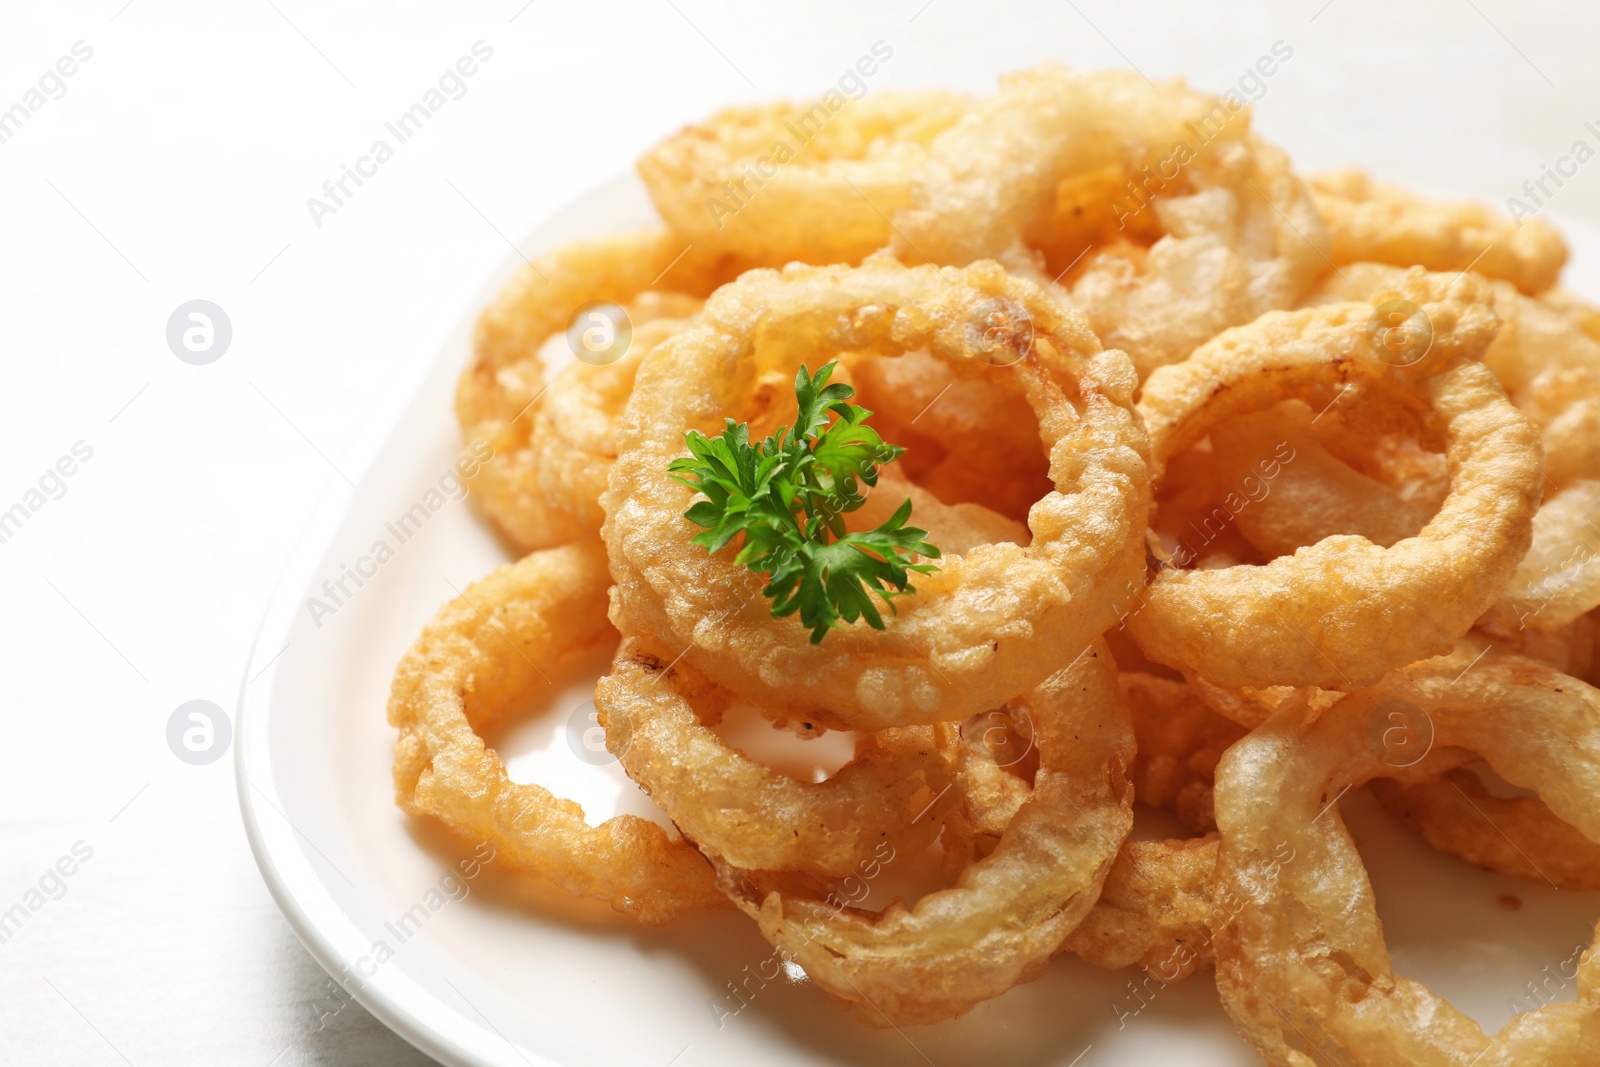 Photo of Homemade crunchy fried onion rings in plate on white background, closeup